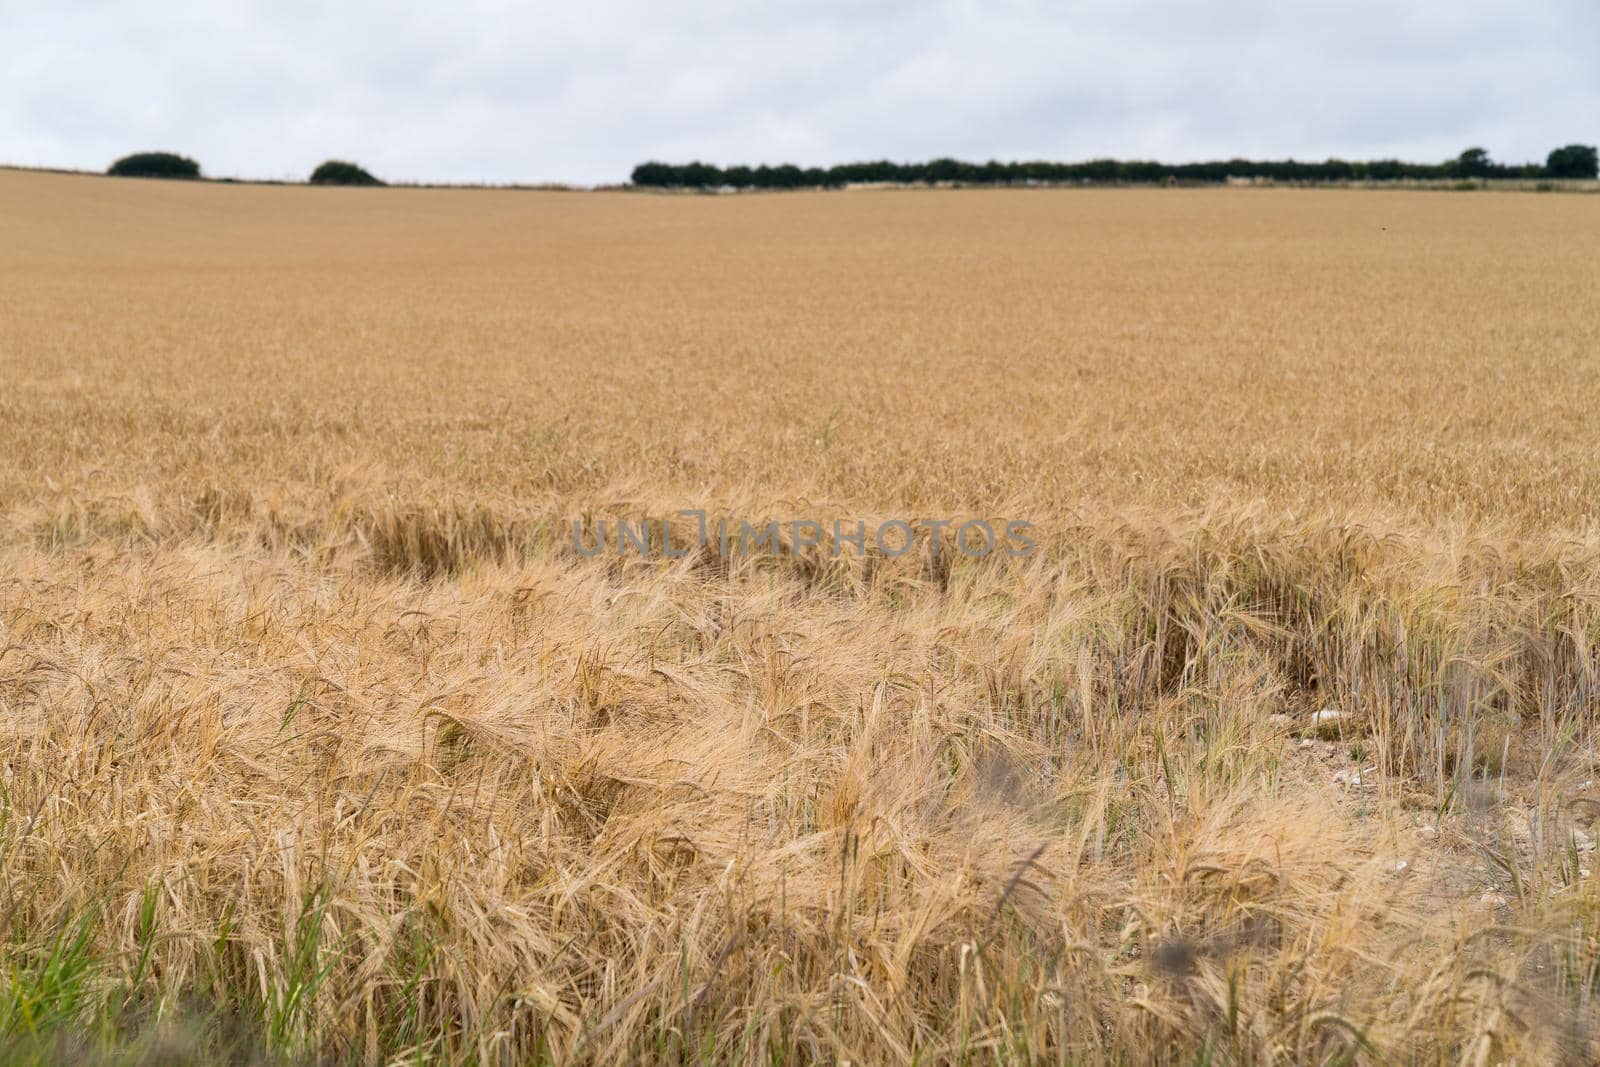 A Wide view over a field with ripe wheat ears against blue sky with clouds